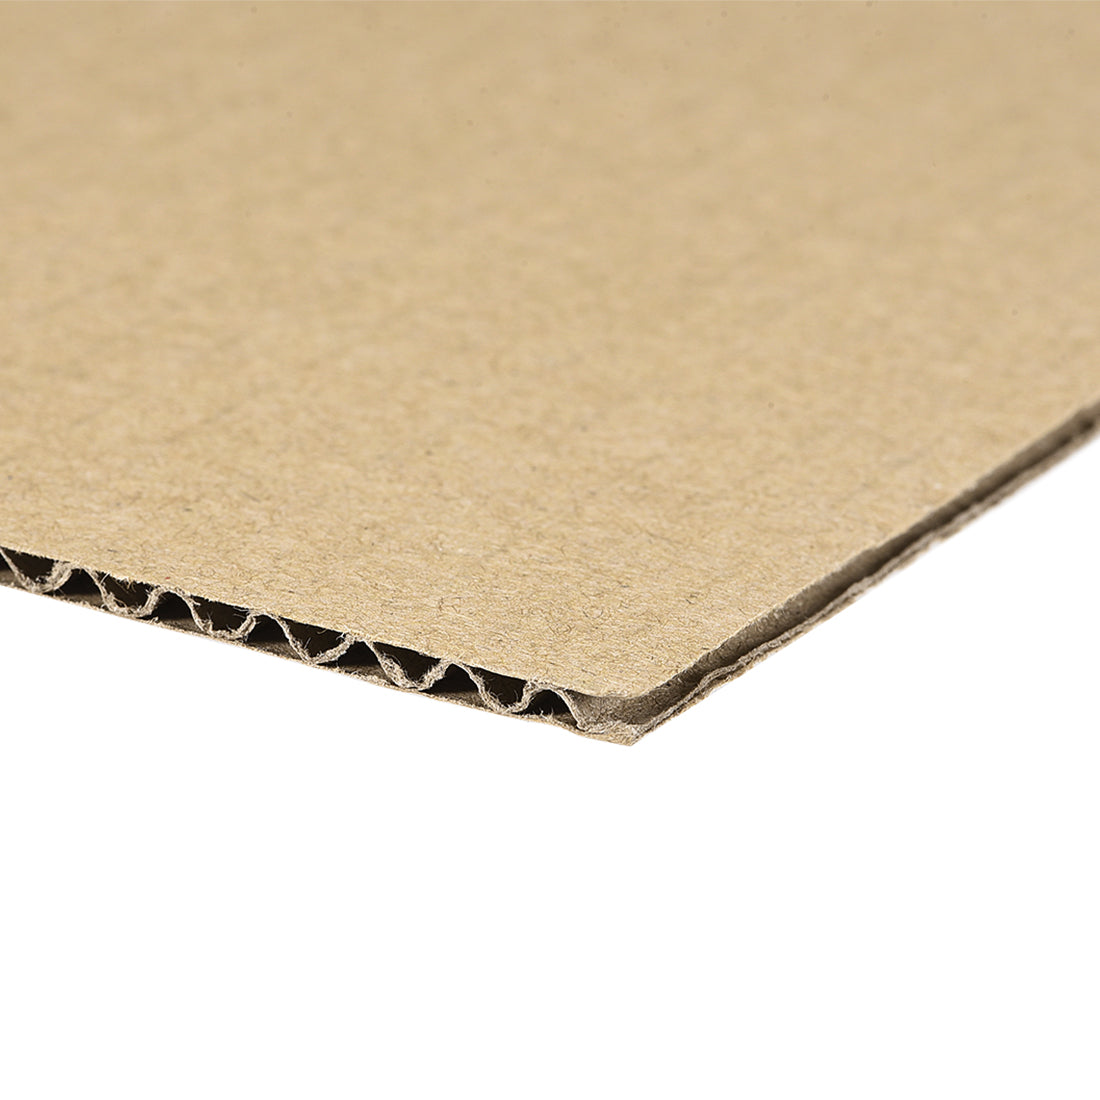 uxcell Uxcell Corrugated Cardboard Filler Insert Sheet Pads 3-Layer 3mm x 8 x 8-Inch 12pcs